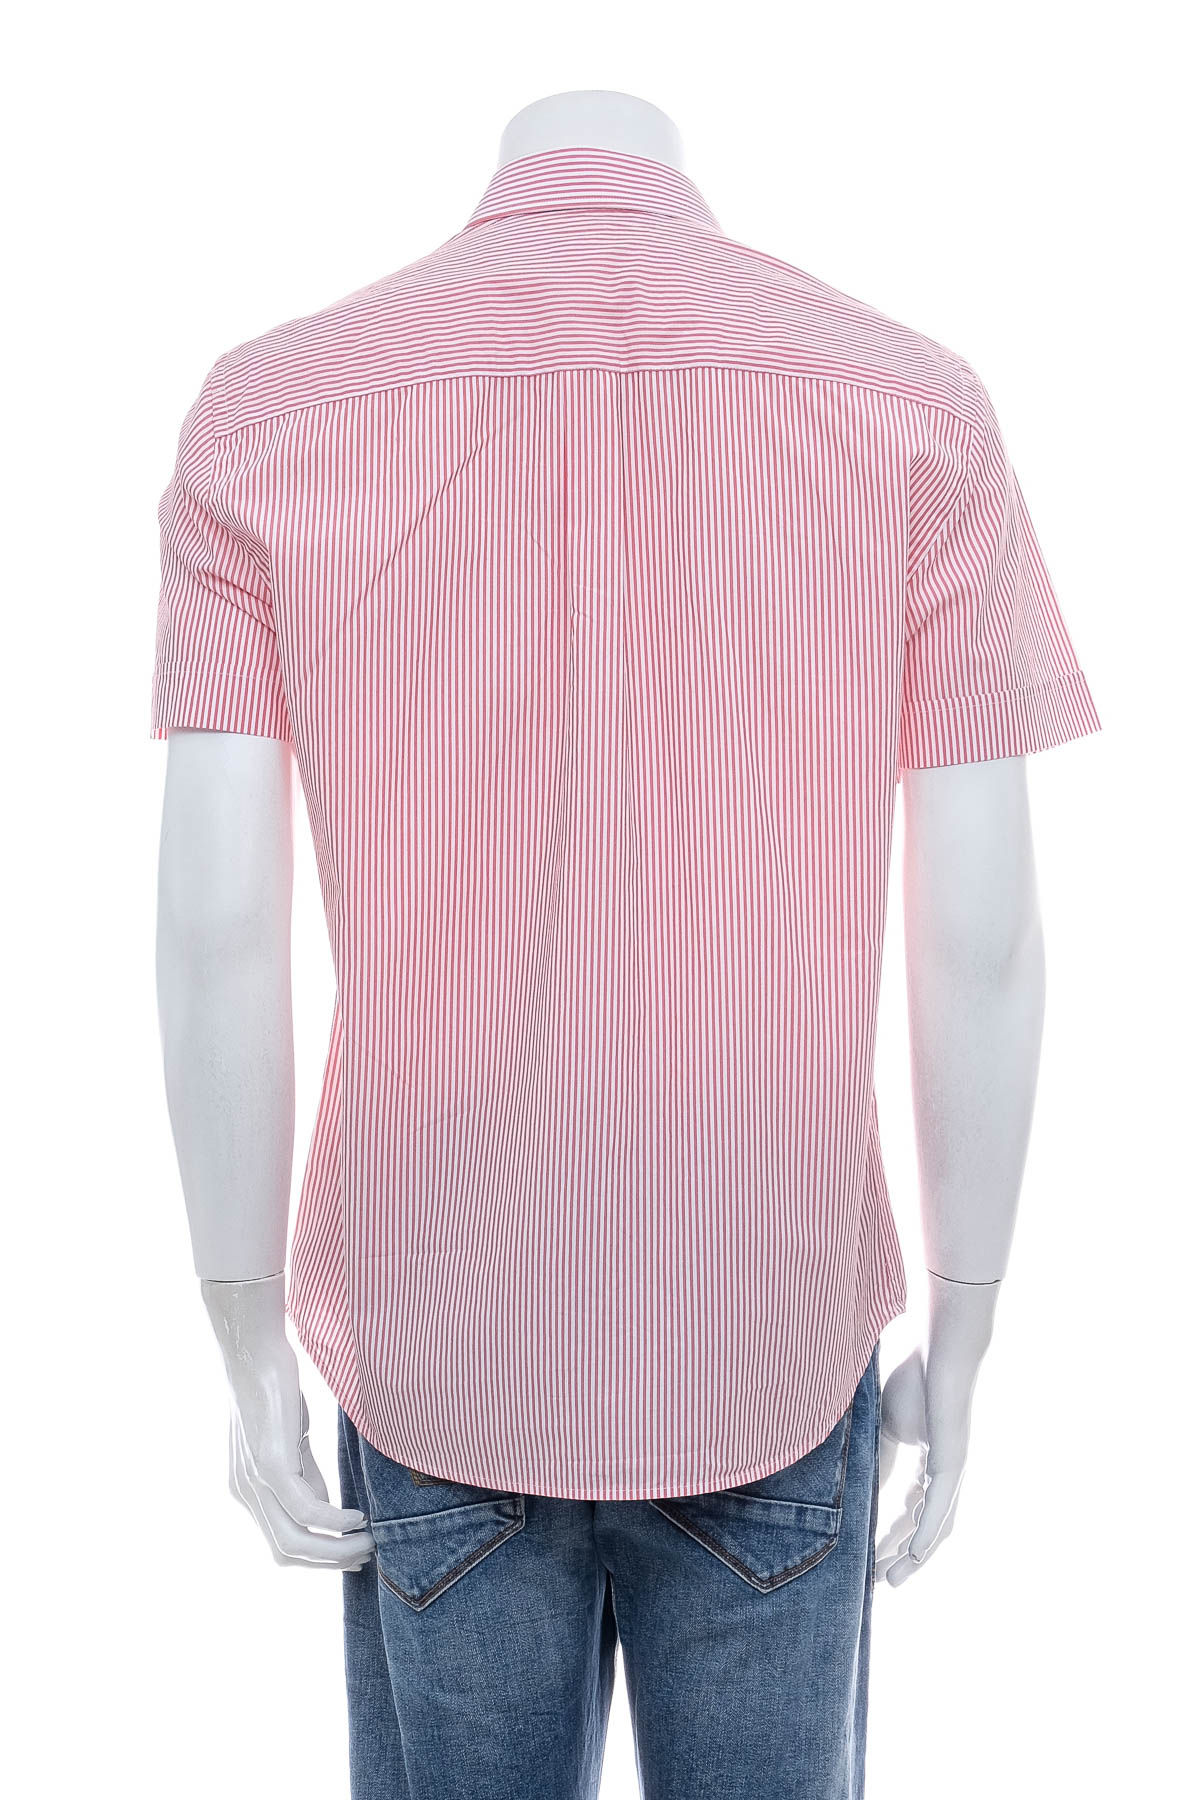 Men's shirt - SELECTION by S.Oliver - 1